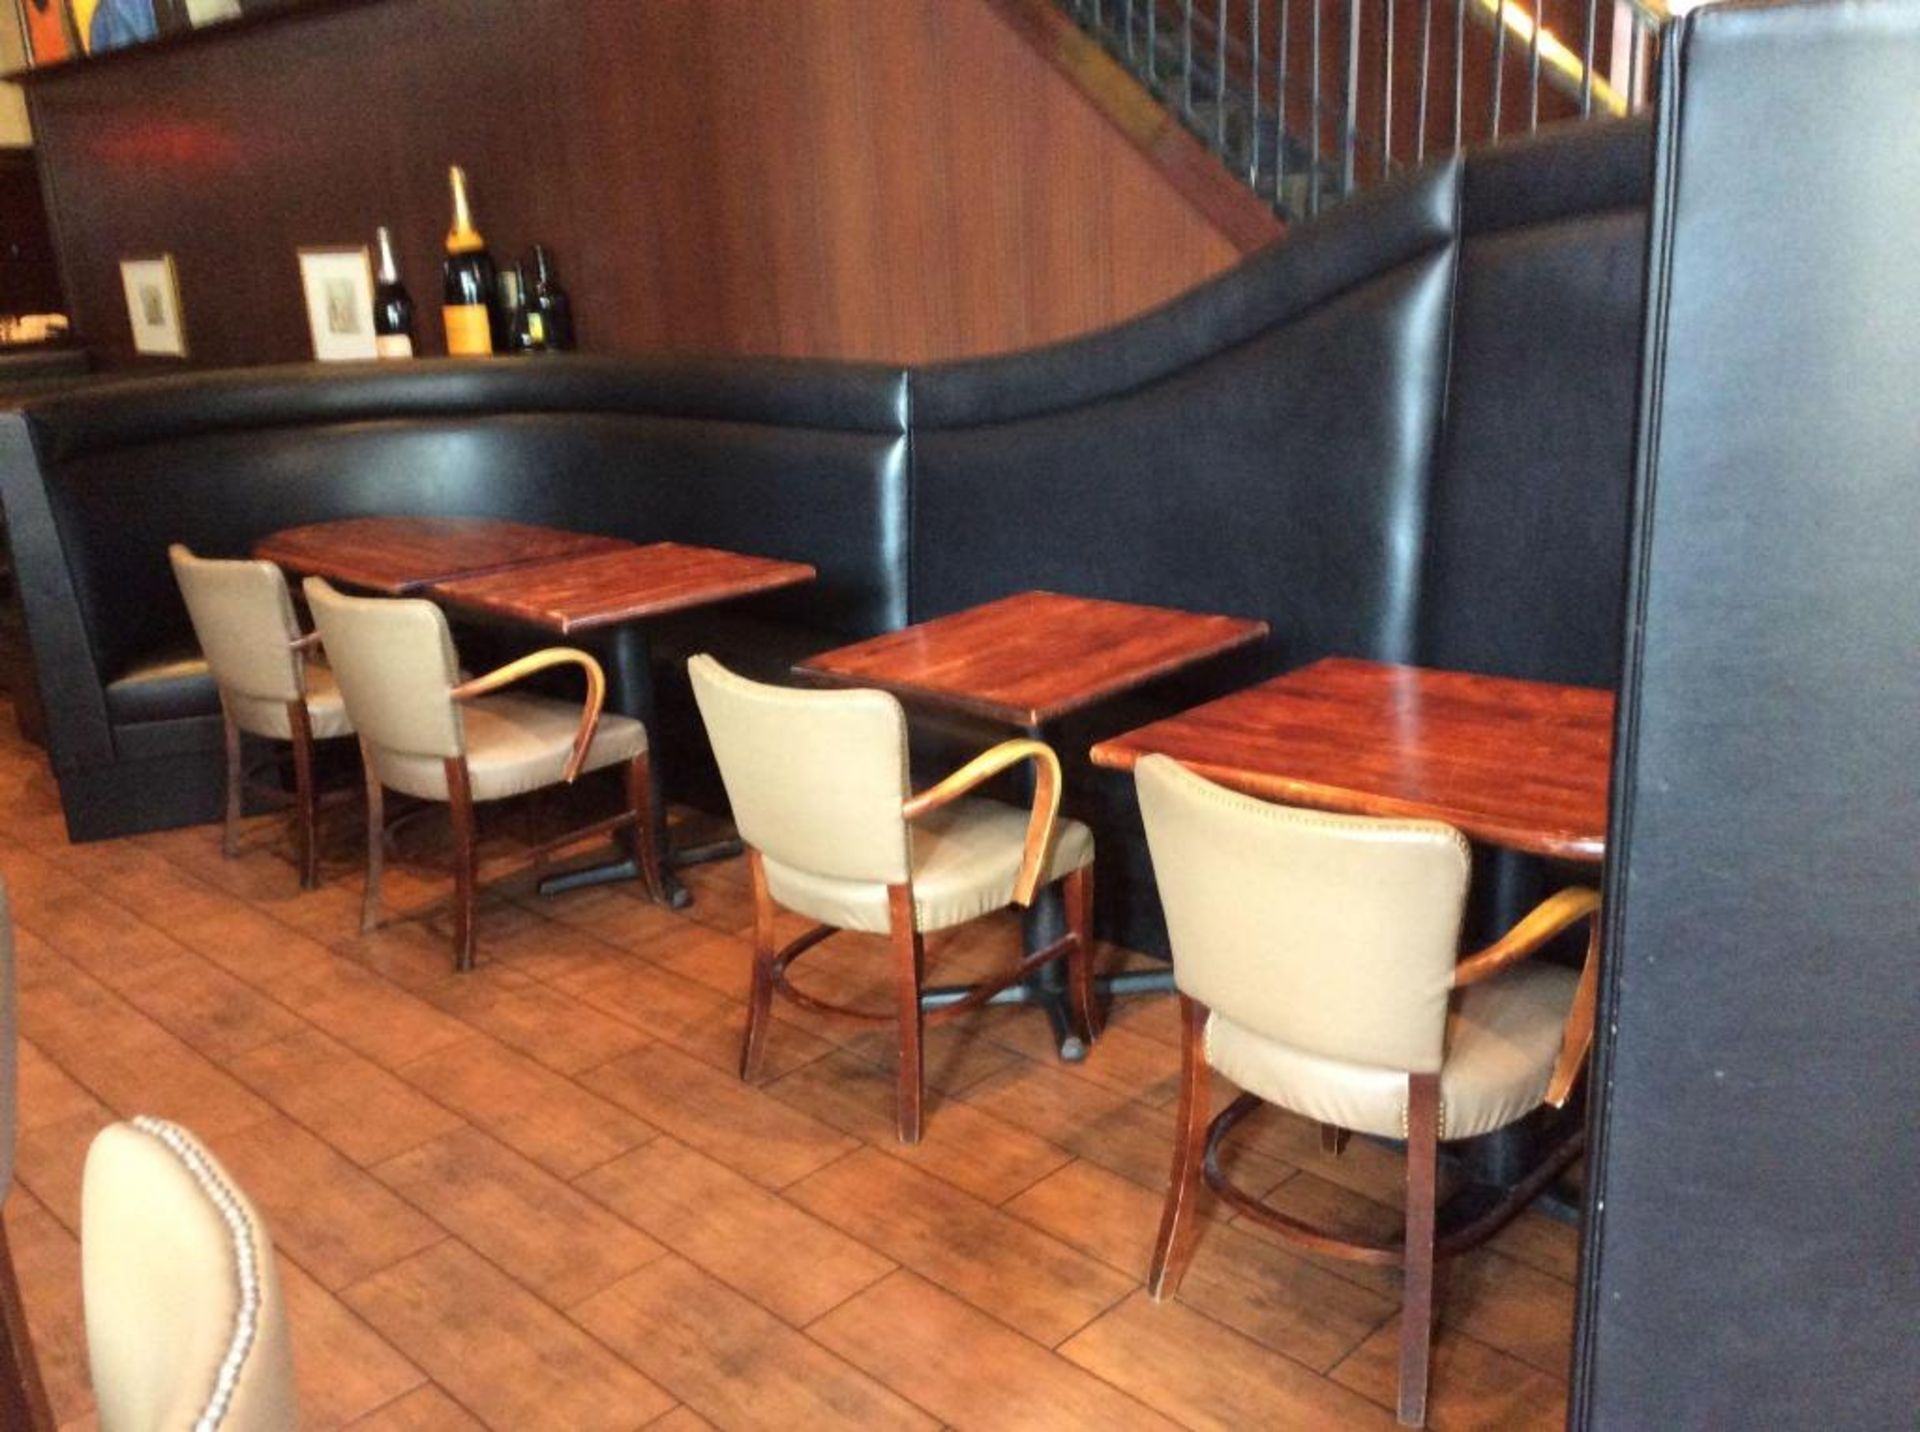 Approx. 18' x 66" wide custom upholstered 3 pc booth wih (2) 24" x 27" wood pedestal tables and (2)